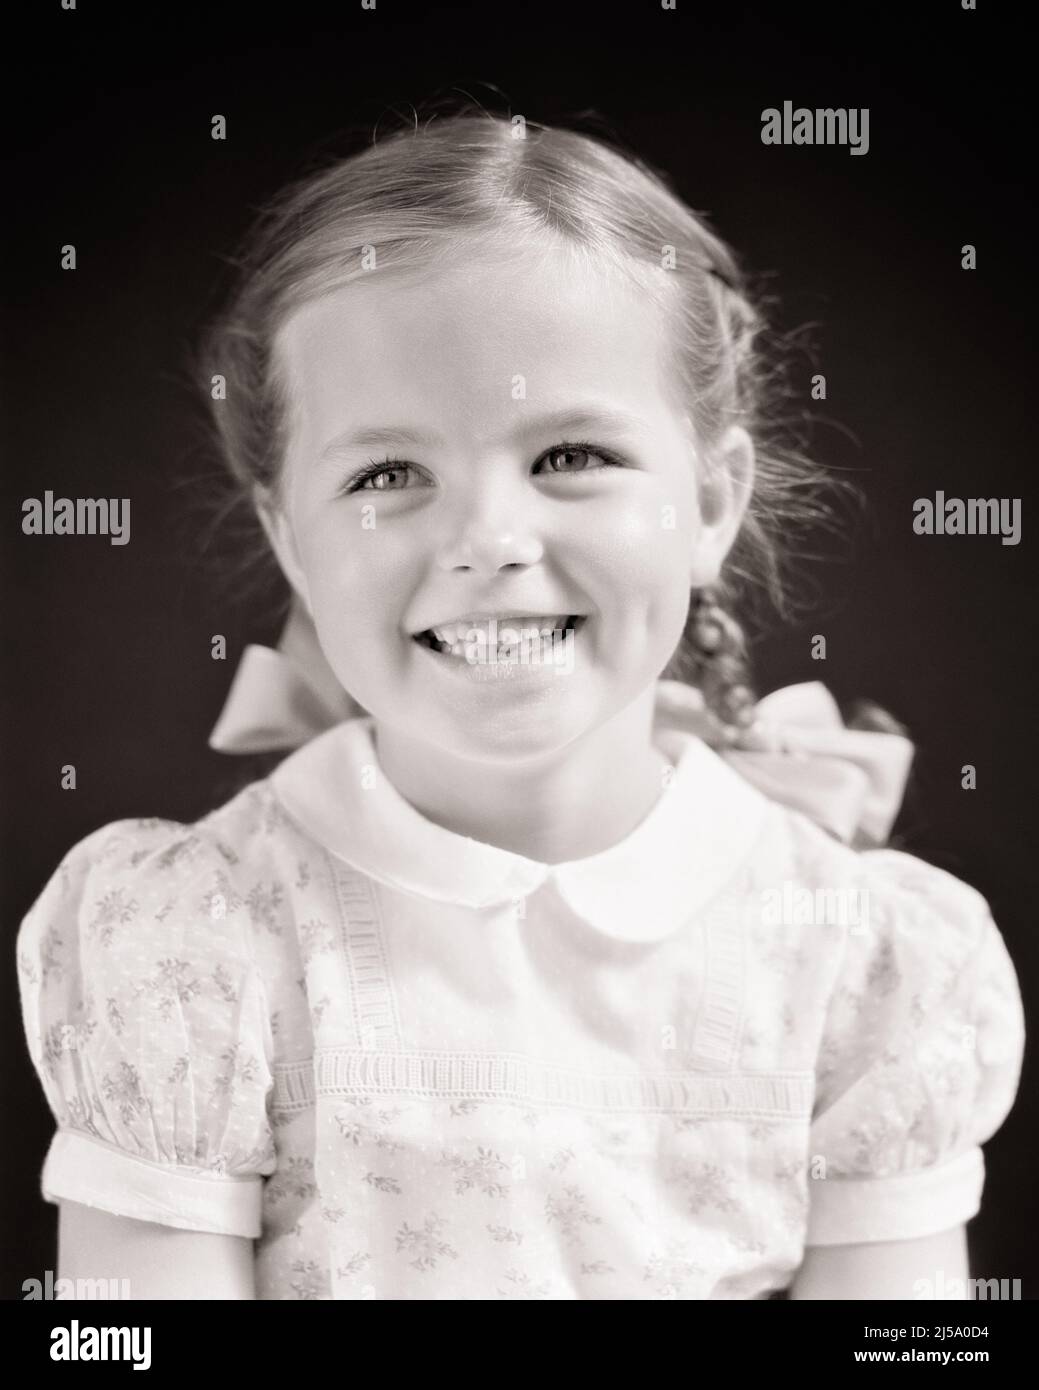 1940s PORTRAIT OF SMILING HAPPY LITTLE GIRL WITH BRAIDED PIGTAILS AND BOWS LOOKING AT CAMERA - j9966 HAR001 HARS HEAD AND SHOULDERS CHEERFUL AND SMILES BRAIDED BOWS JOYFUL STYLISH PLEASANT AGREEABLE CHARMING GROWTH JUVENILES LOVABLE PIGTAILS PLEASING ADORABLE APPEALING BLACK AND WHITE CAUCASIAN ETHNICITY HAR001 OLD FASHIONED Stock Photo